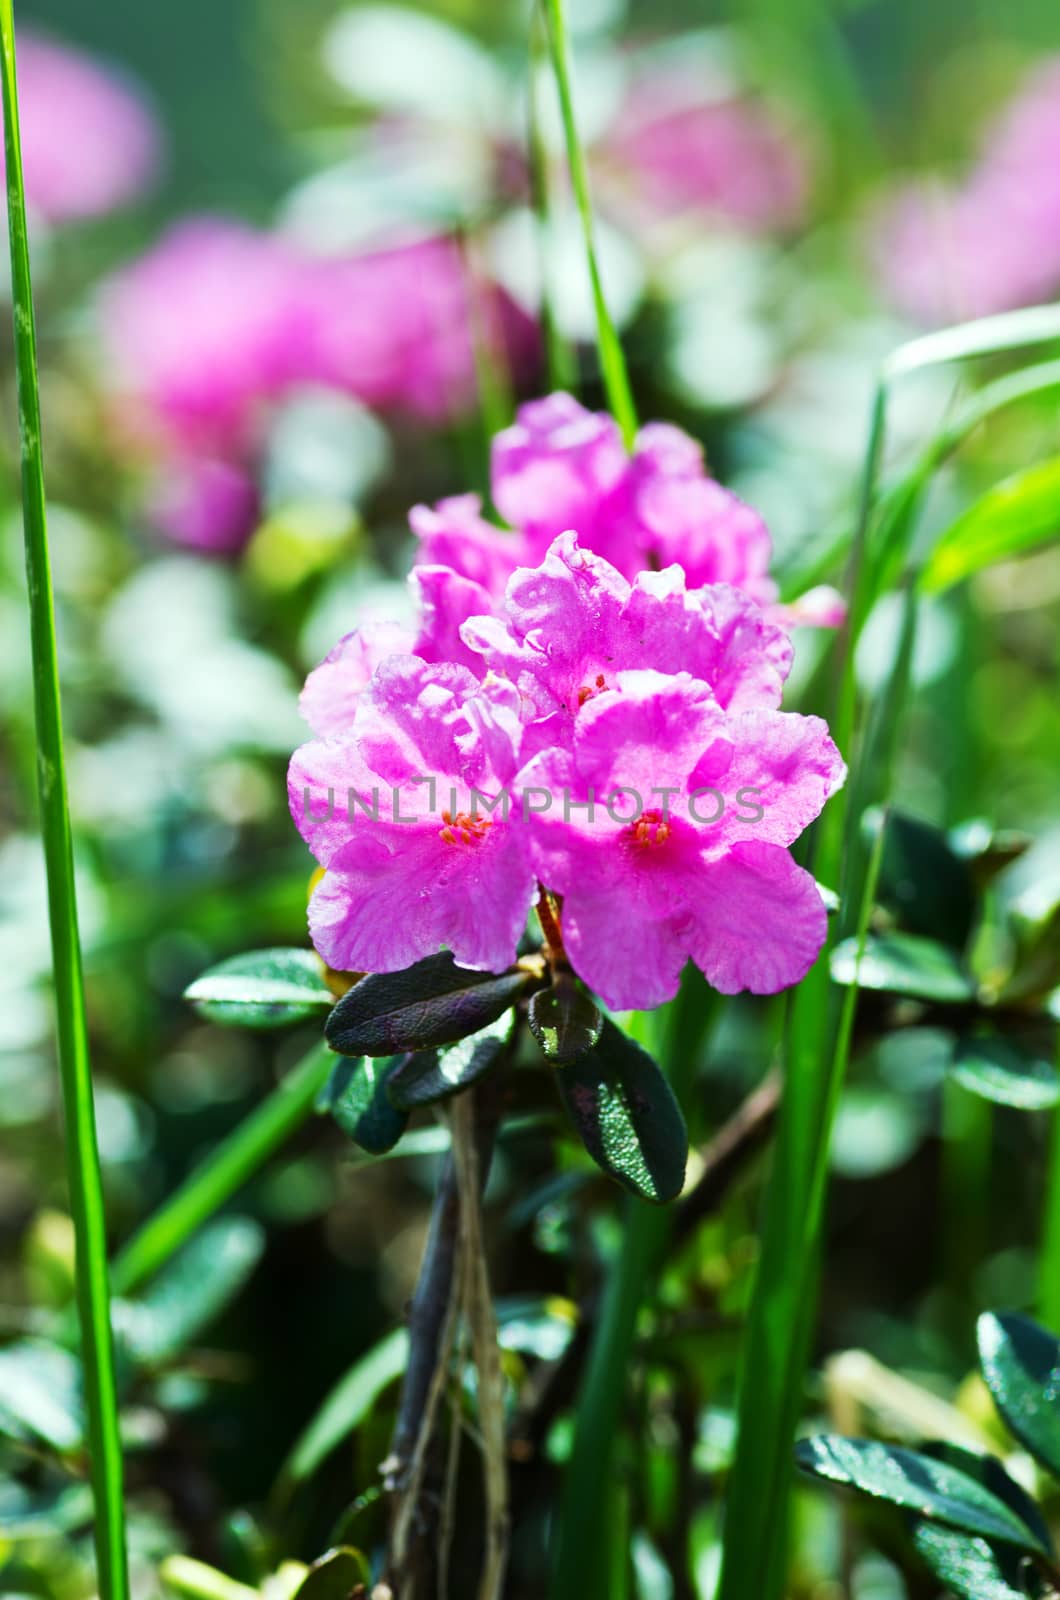 rhododendron in the Carpathians mount. Close up.